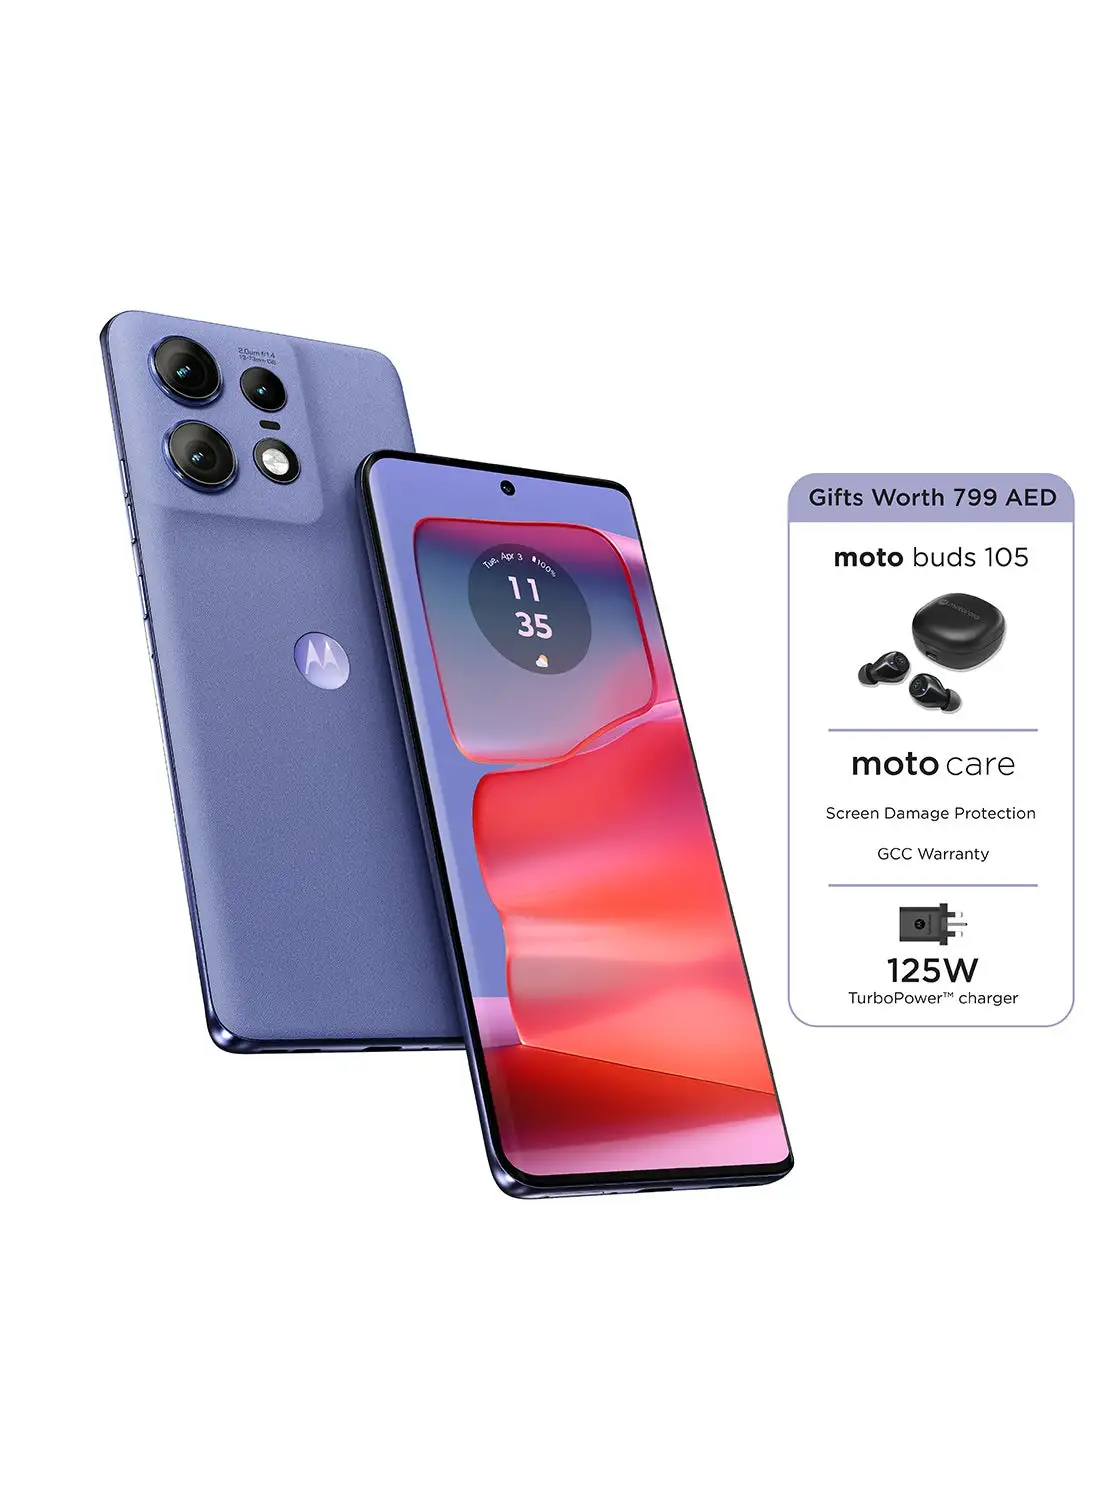 Motorola Edge 50 Pro Dual SIM Luxe Lavender 12GB+12GB RAM 512GB 5G With Free Gift and Accidental Damage Protection - Middle East Version